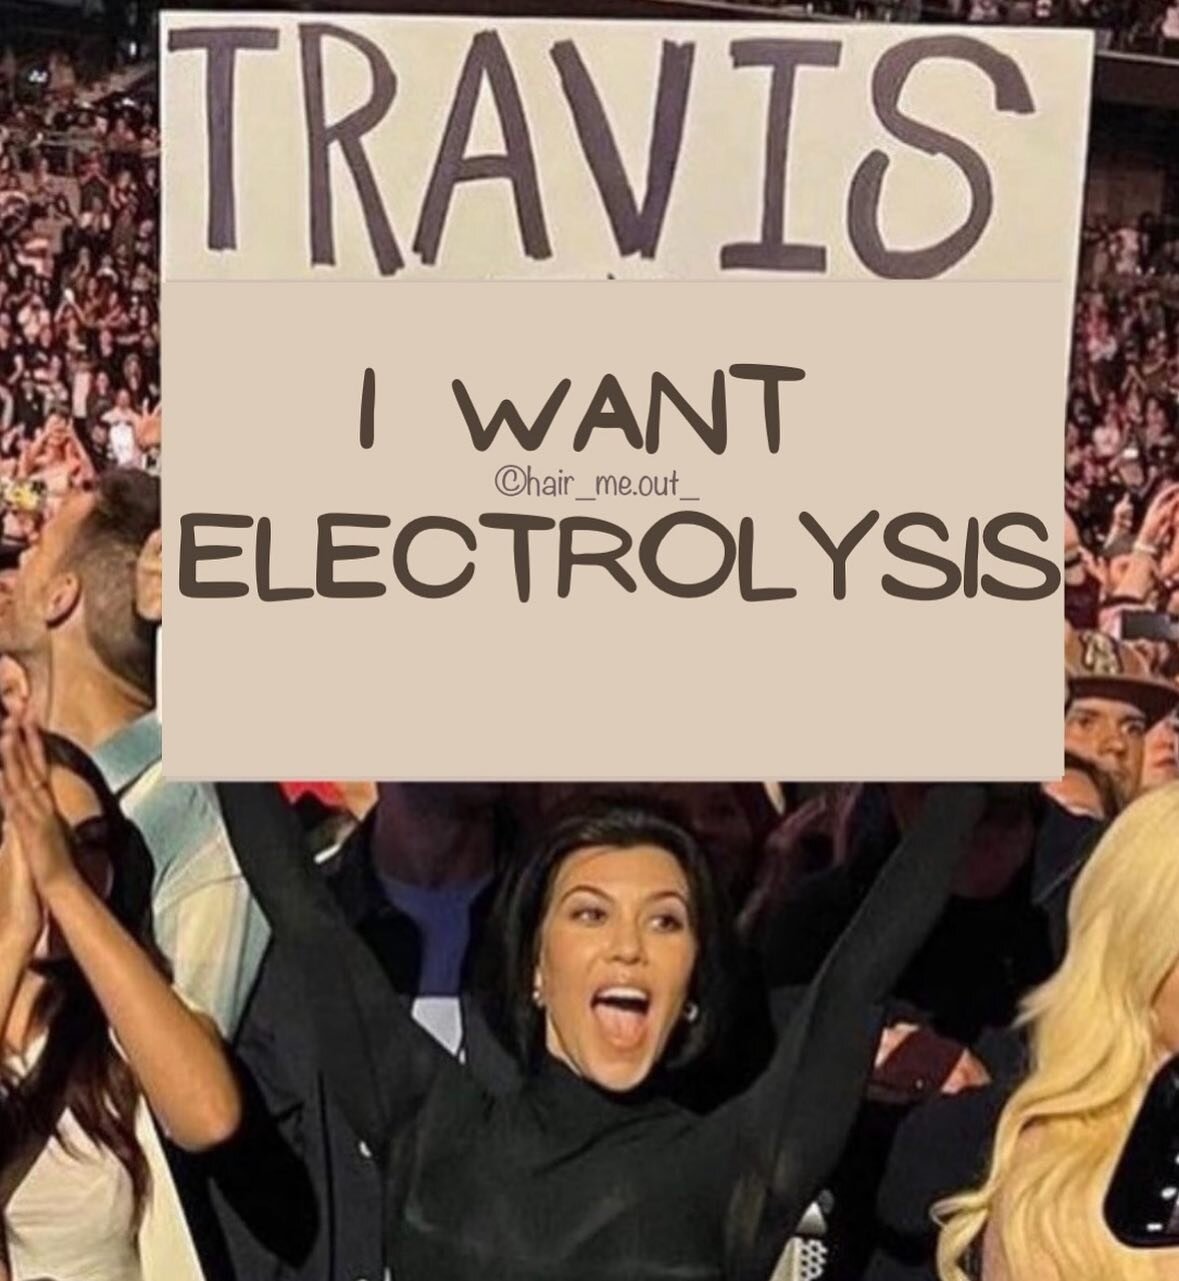 Get in line Kourt! And Trav IF you have any hair we can get at them too, right through your tattoos 😉

Did you know thermolysis method of electrolysis is safe during pregnancy? It is up to your electrologists discretion and it is advised to avoid th